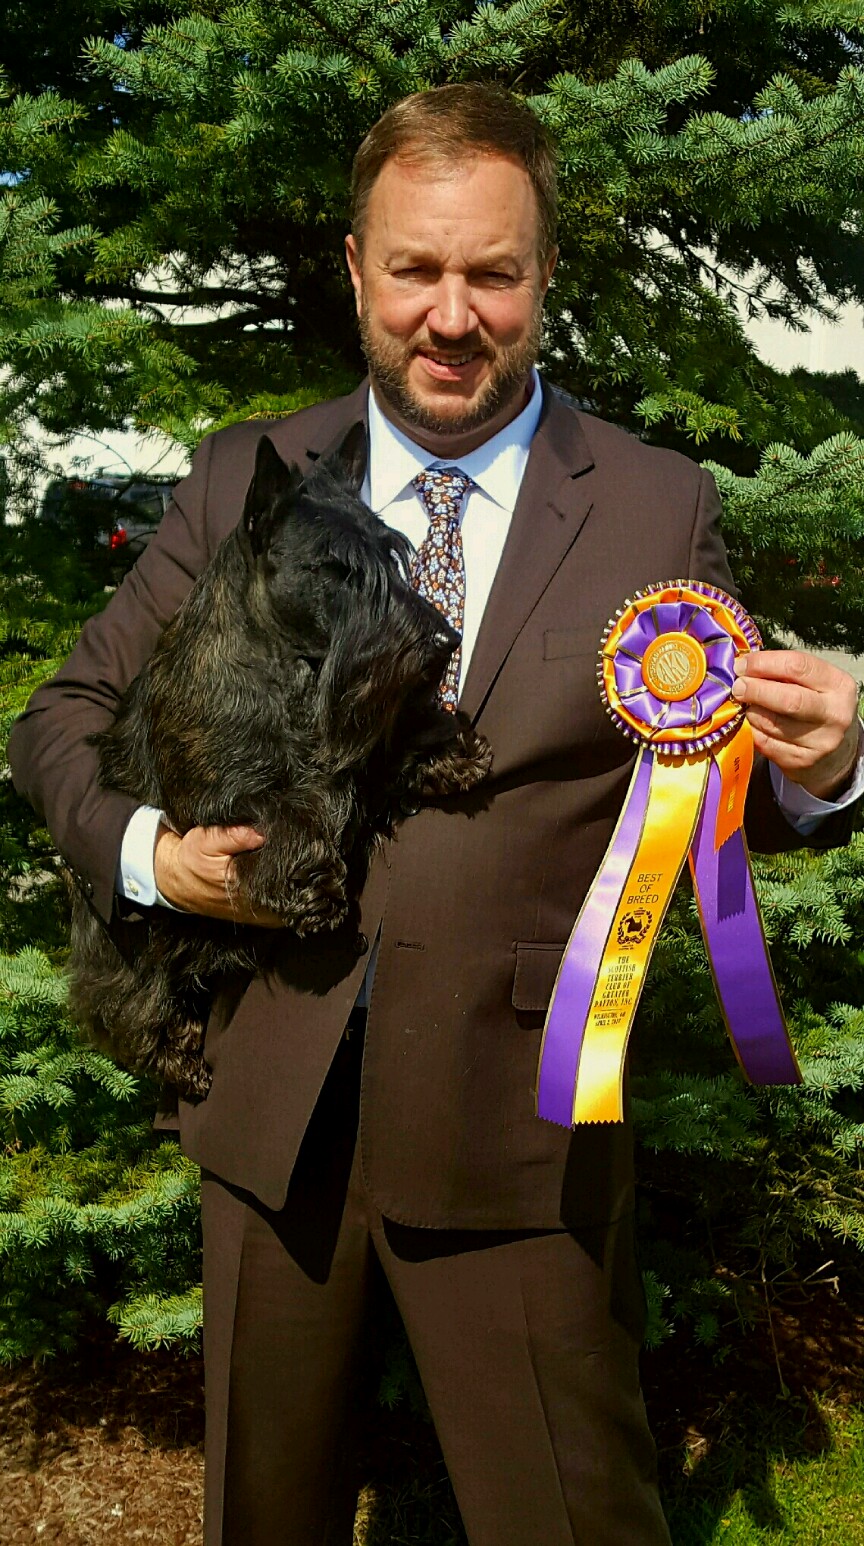 Calvin after Best in Specialty Show (BISS) win in Dayton